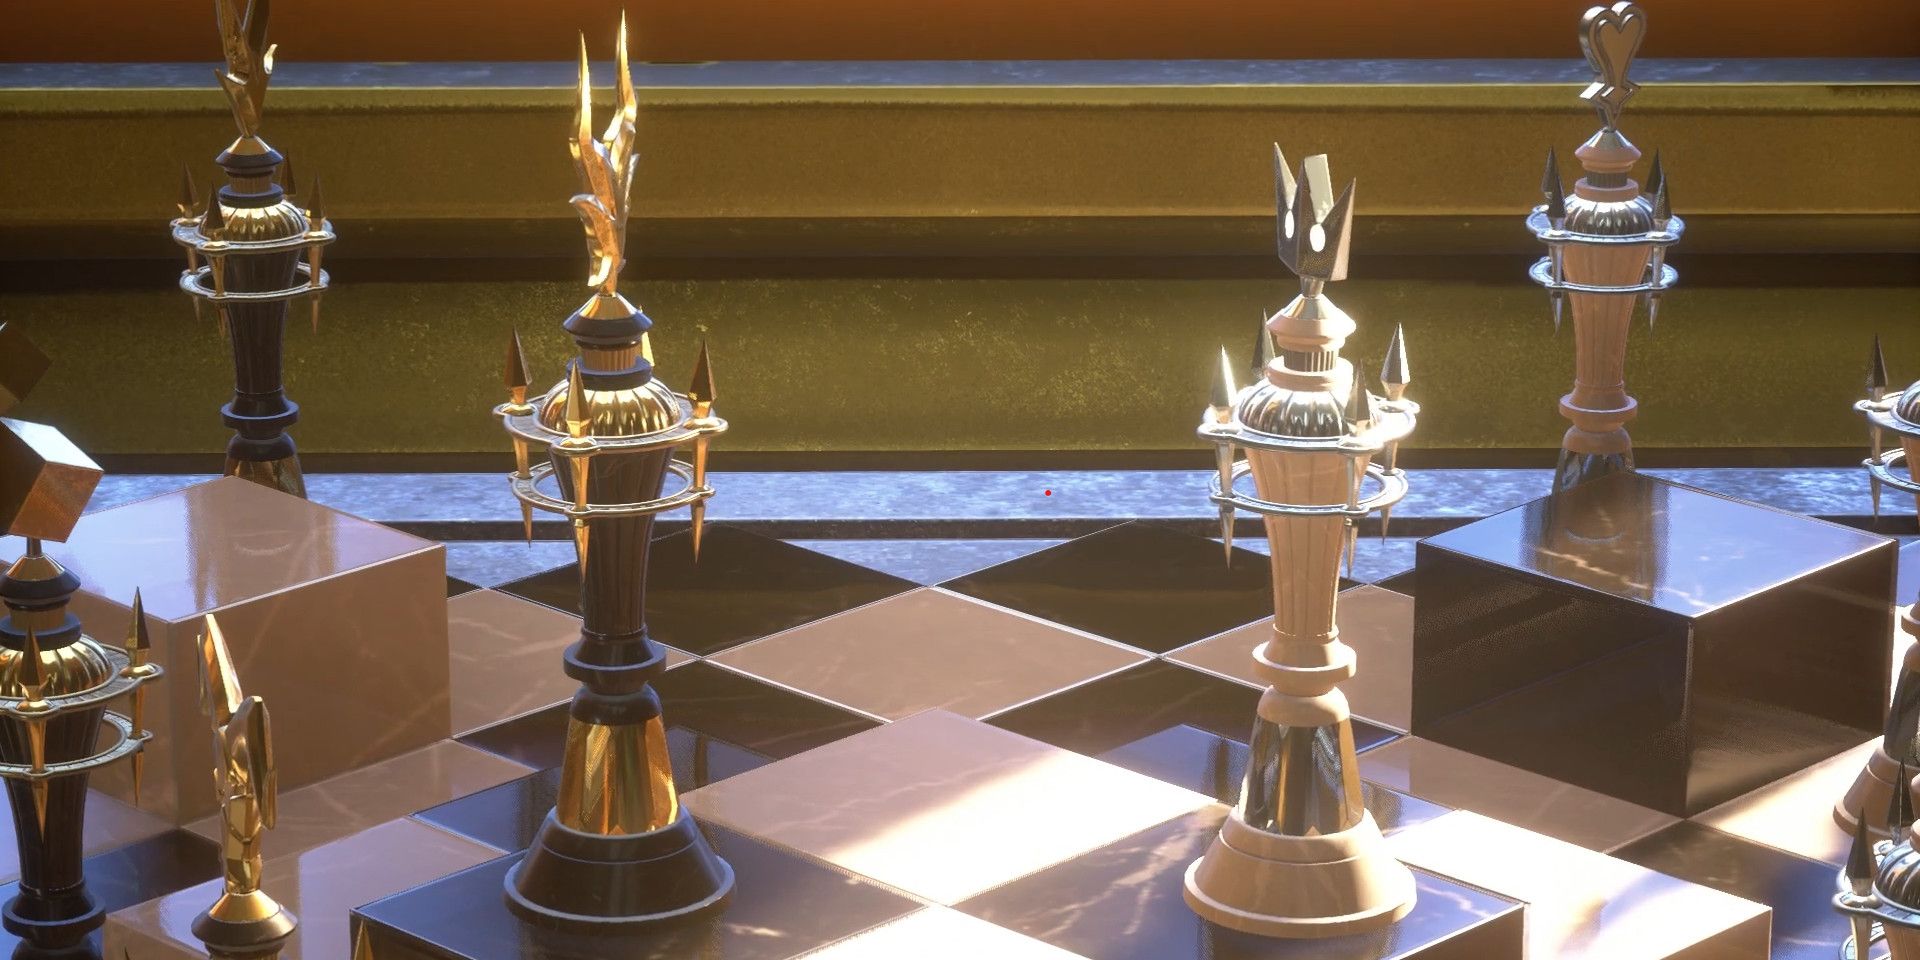 Can help me name the chess pieces? : r/KingdomHearts